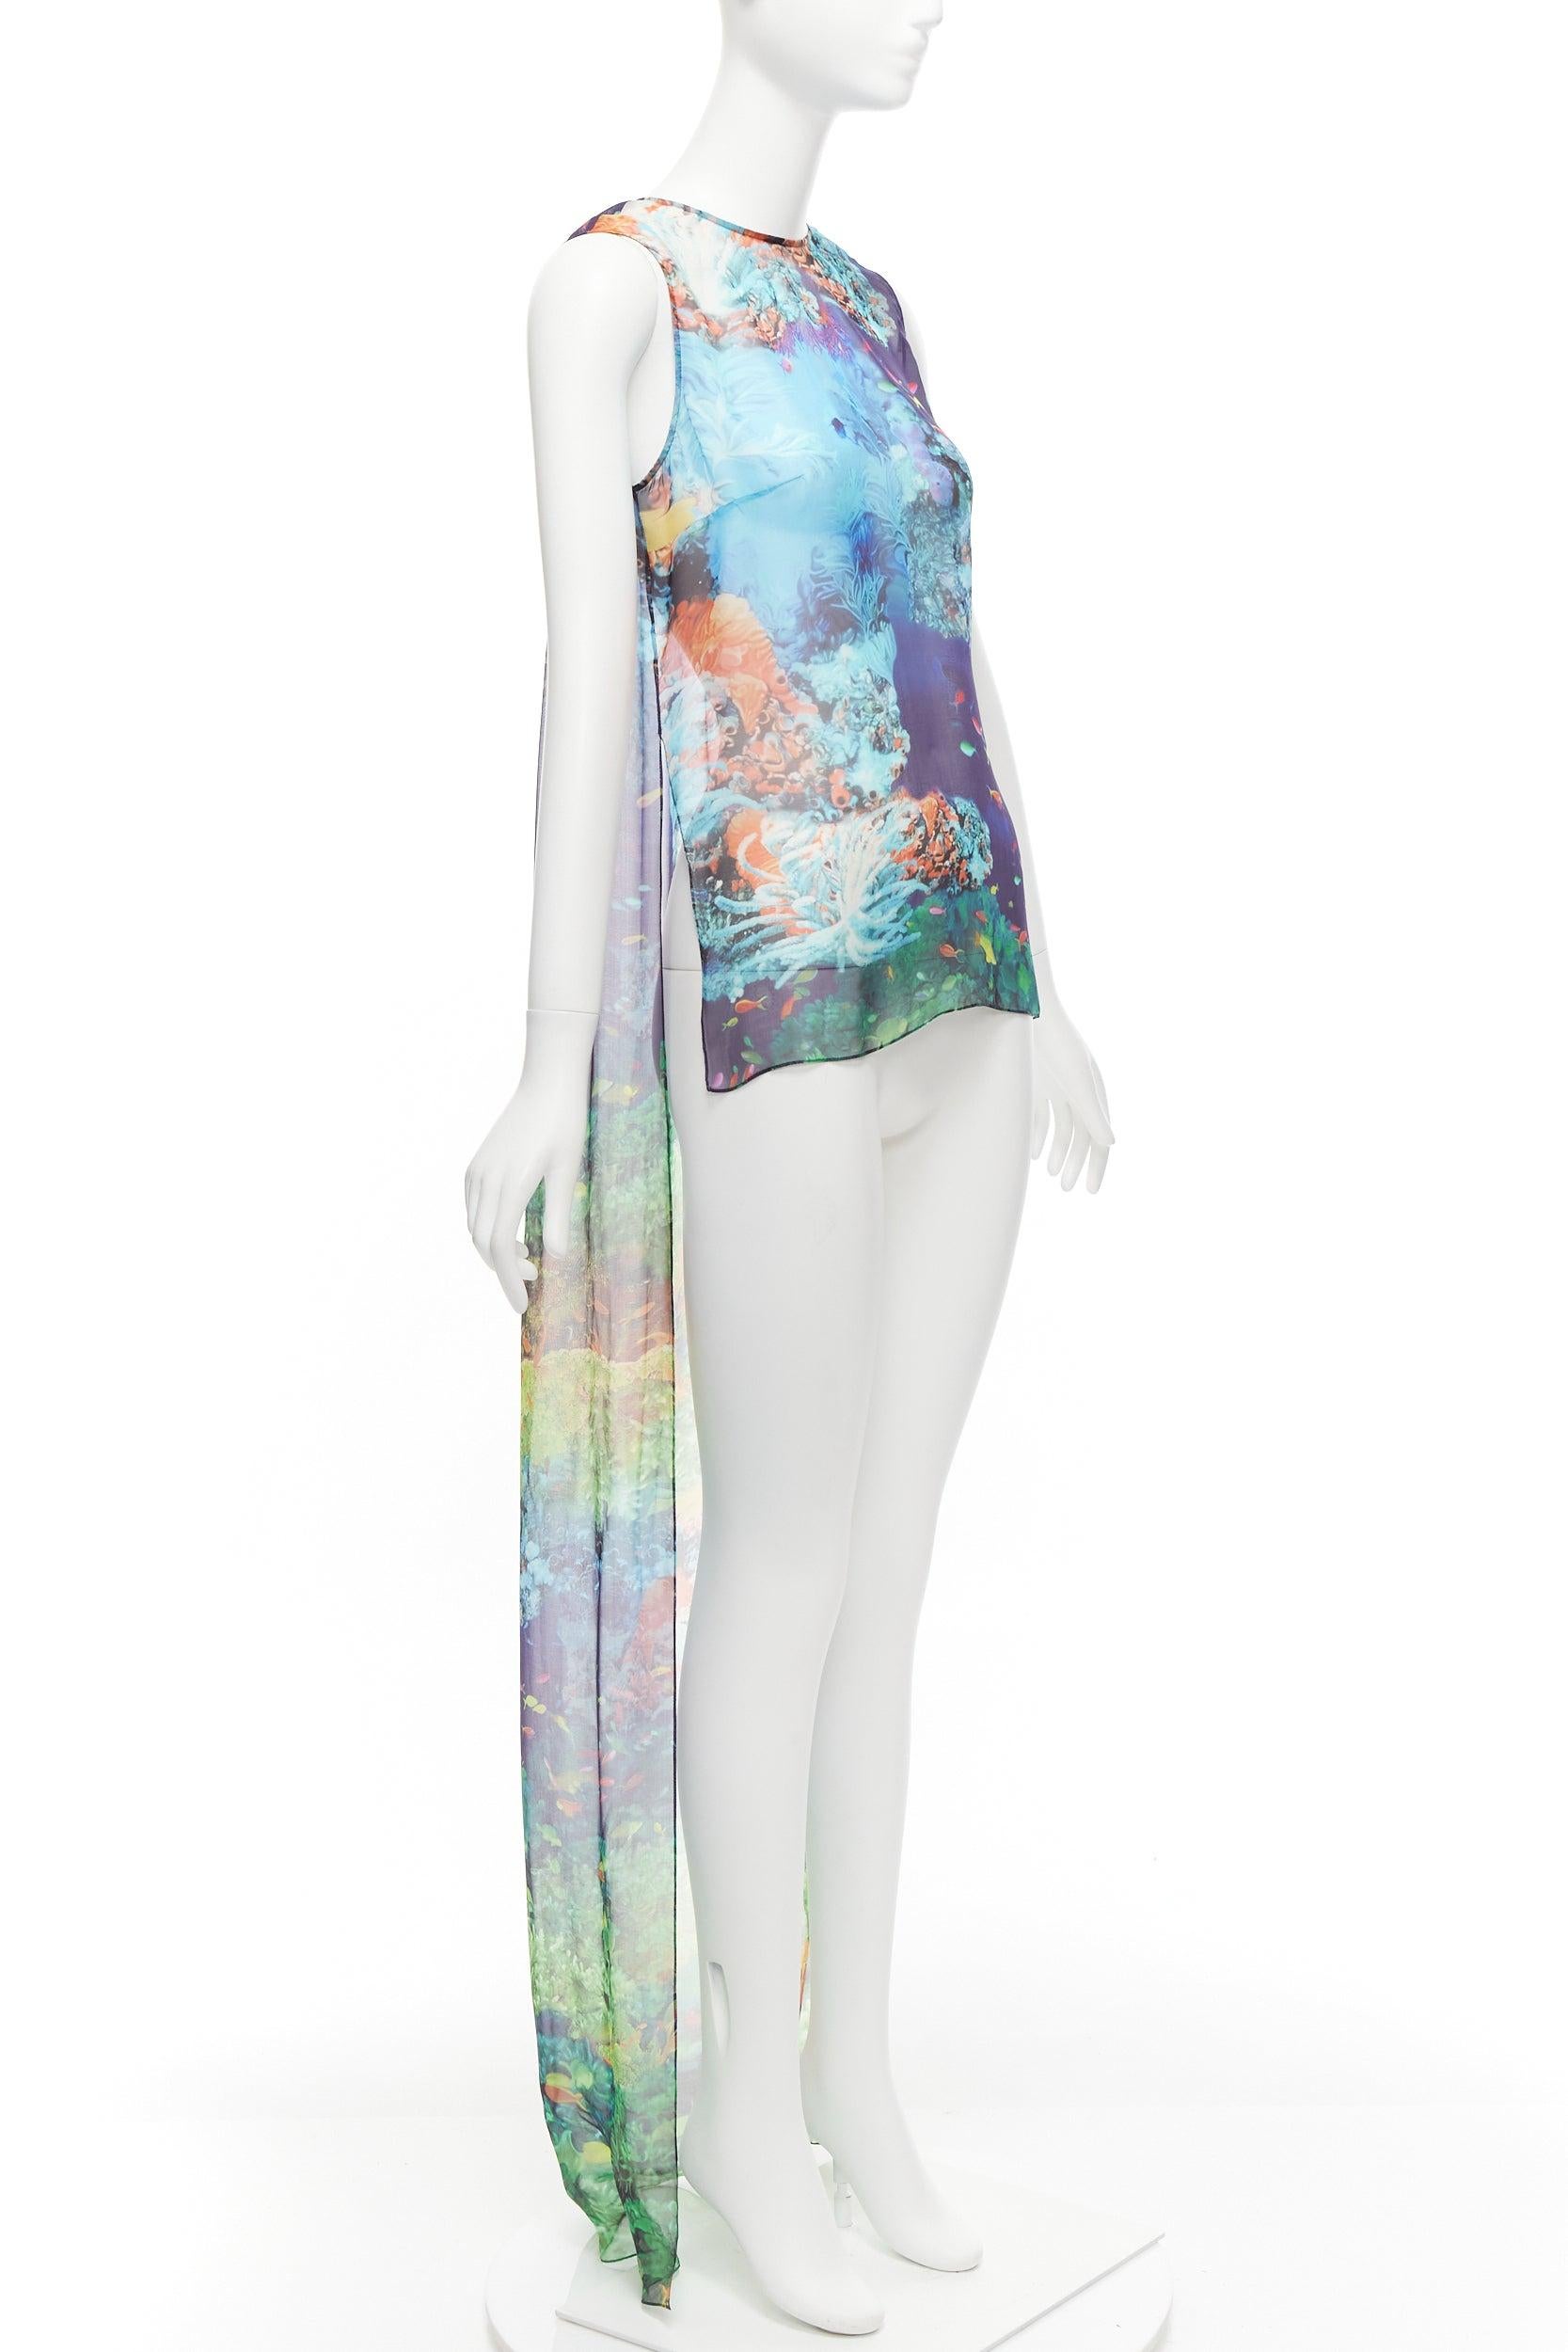 MARY KATRANTZOU 100% silk colourful aquatic print high low sheer top UK8 S
Reference: NKLL/A00018
Brand: Mary Katrantzou
Material: Silk
Color: Multicolour
Pattern: Animal Print
Closure: Keyhole Button
Extra Details: Back keyhole closure.
Made in: